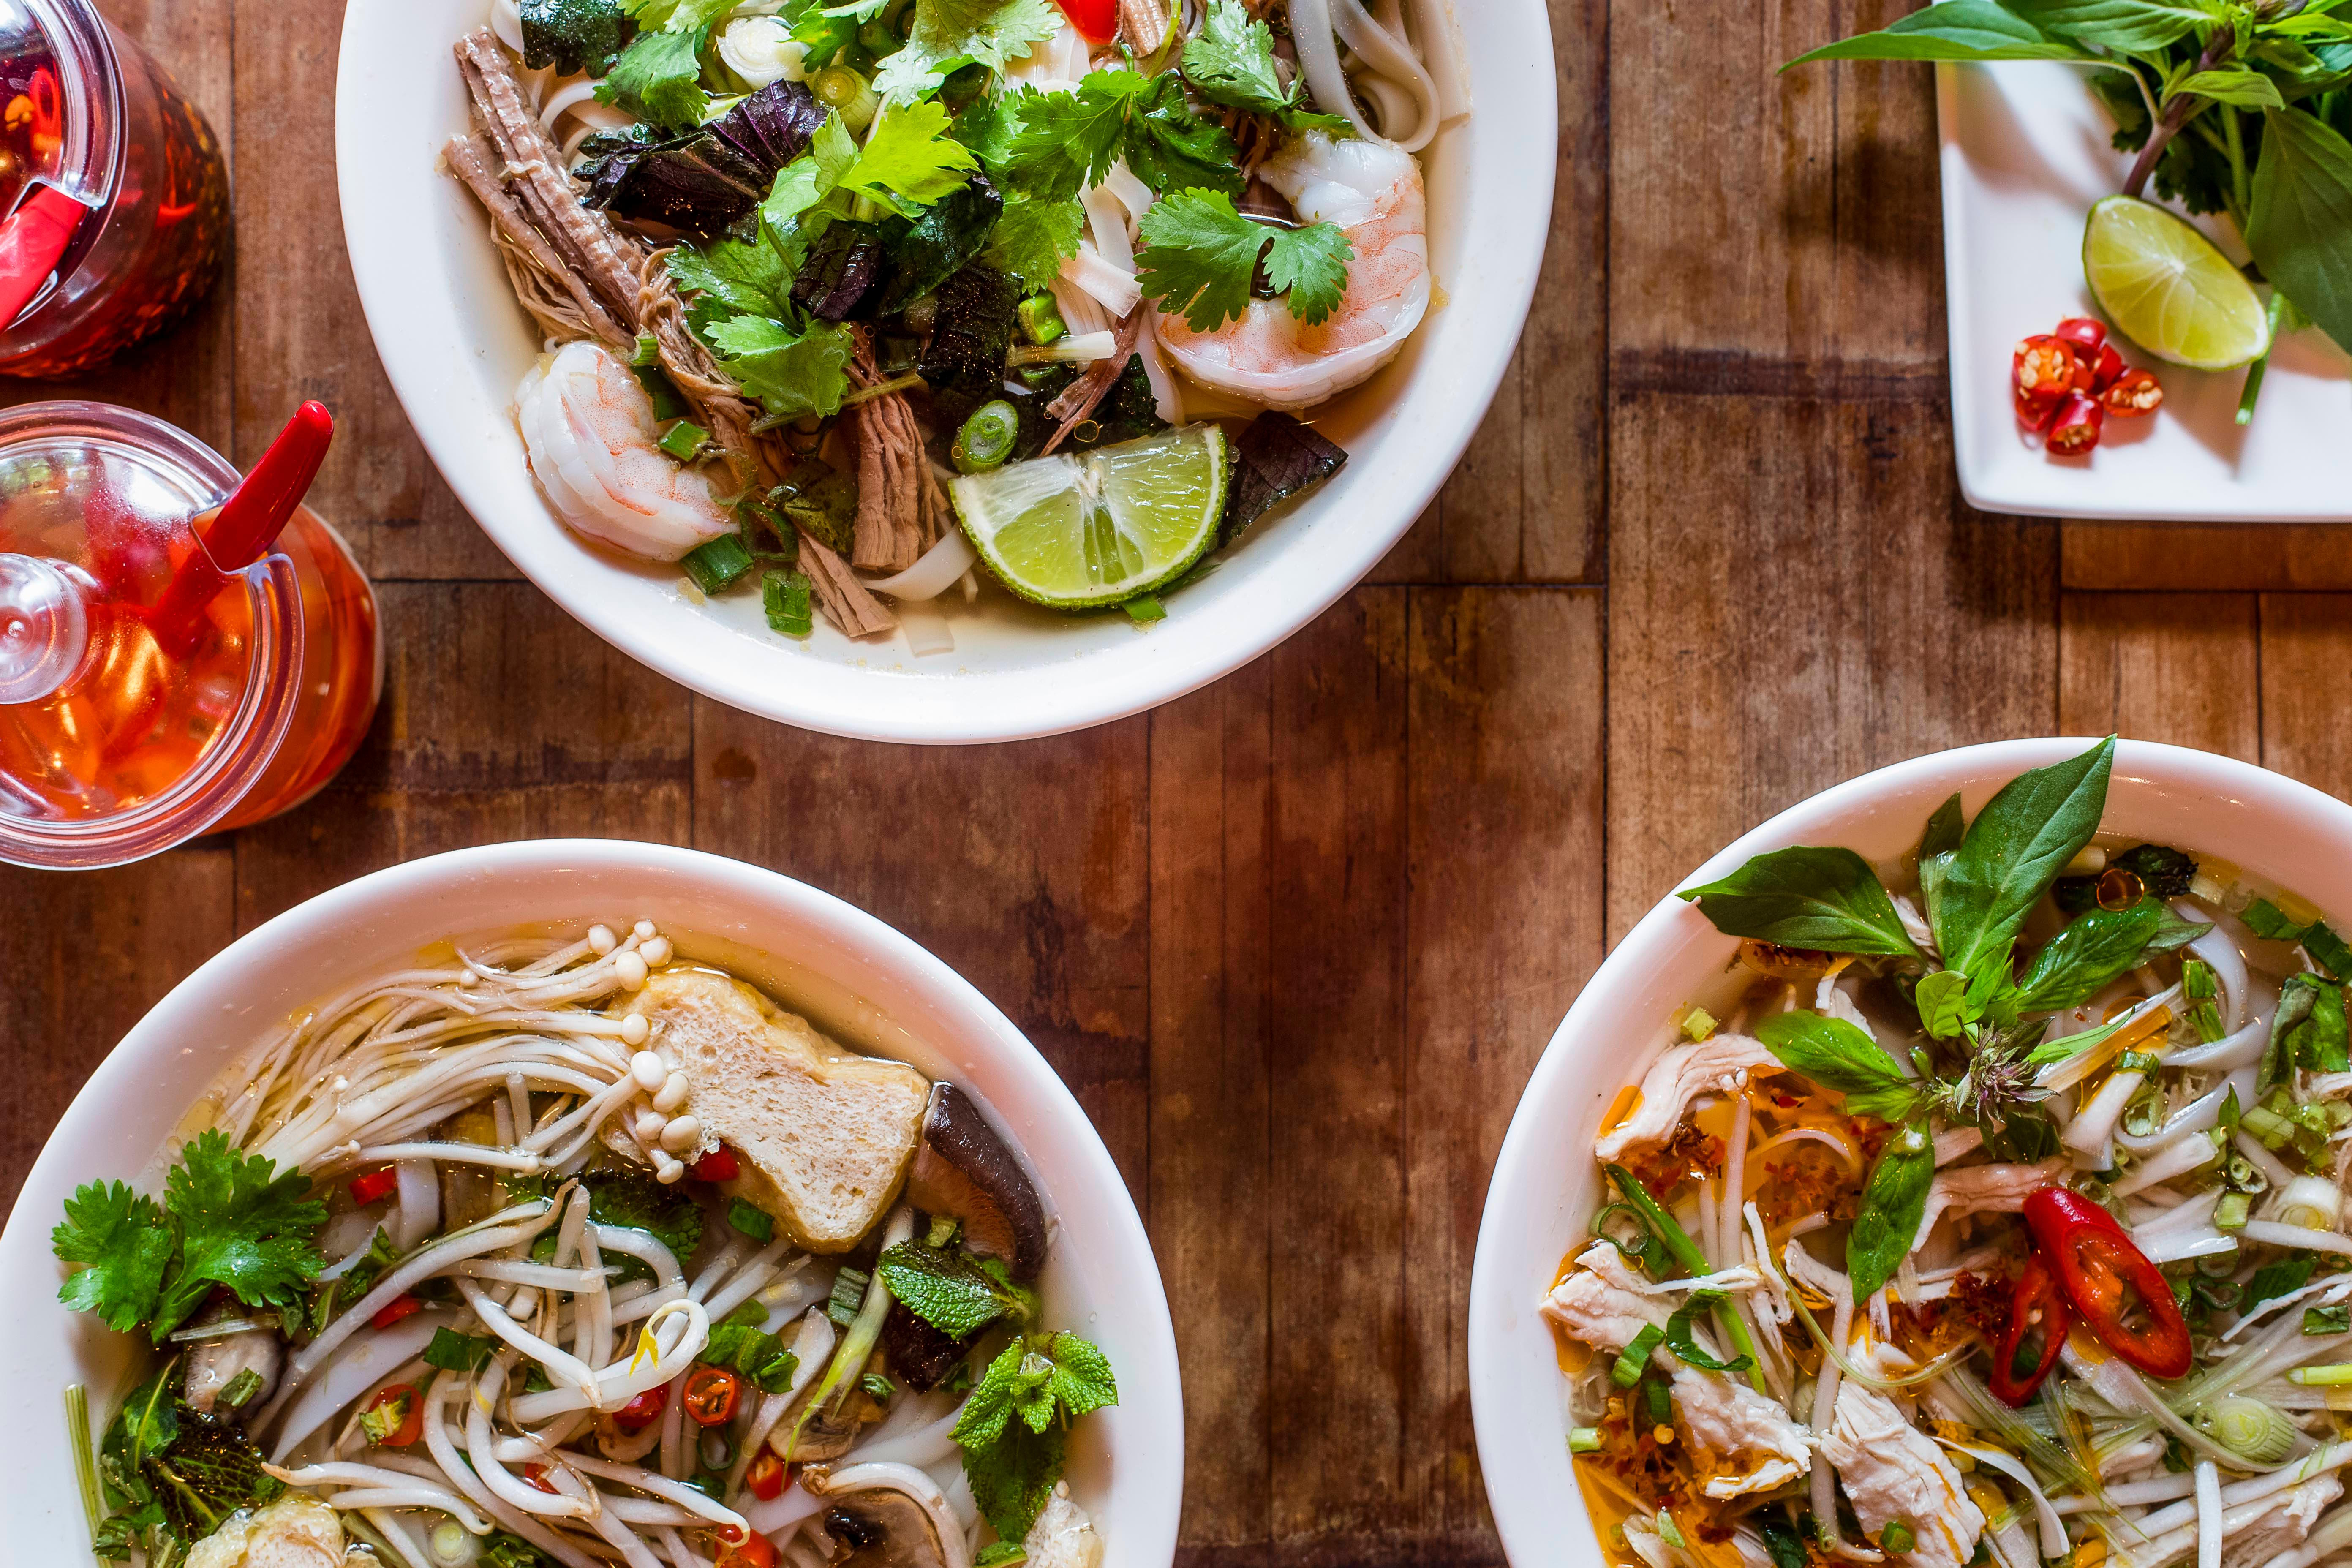 Fresh, Gluten-free, healthy Vietnamese Pho noodle soup Pho Lincoln 01522 438667